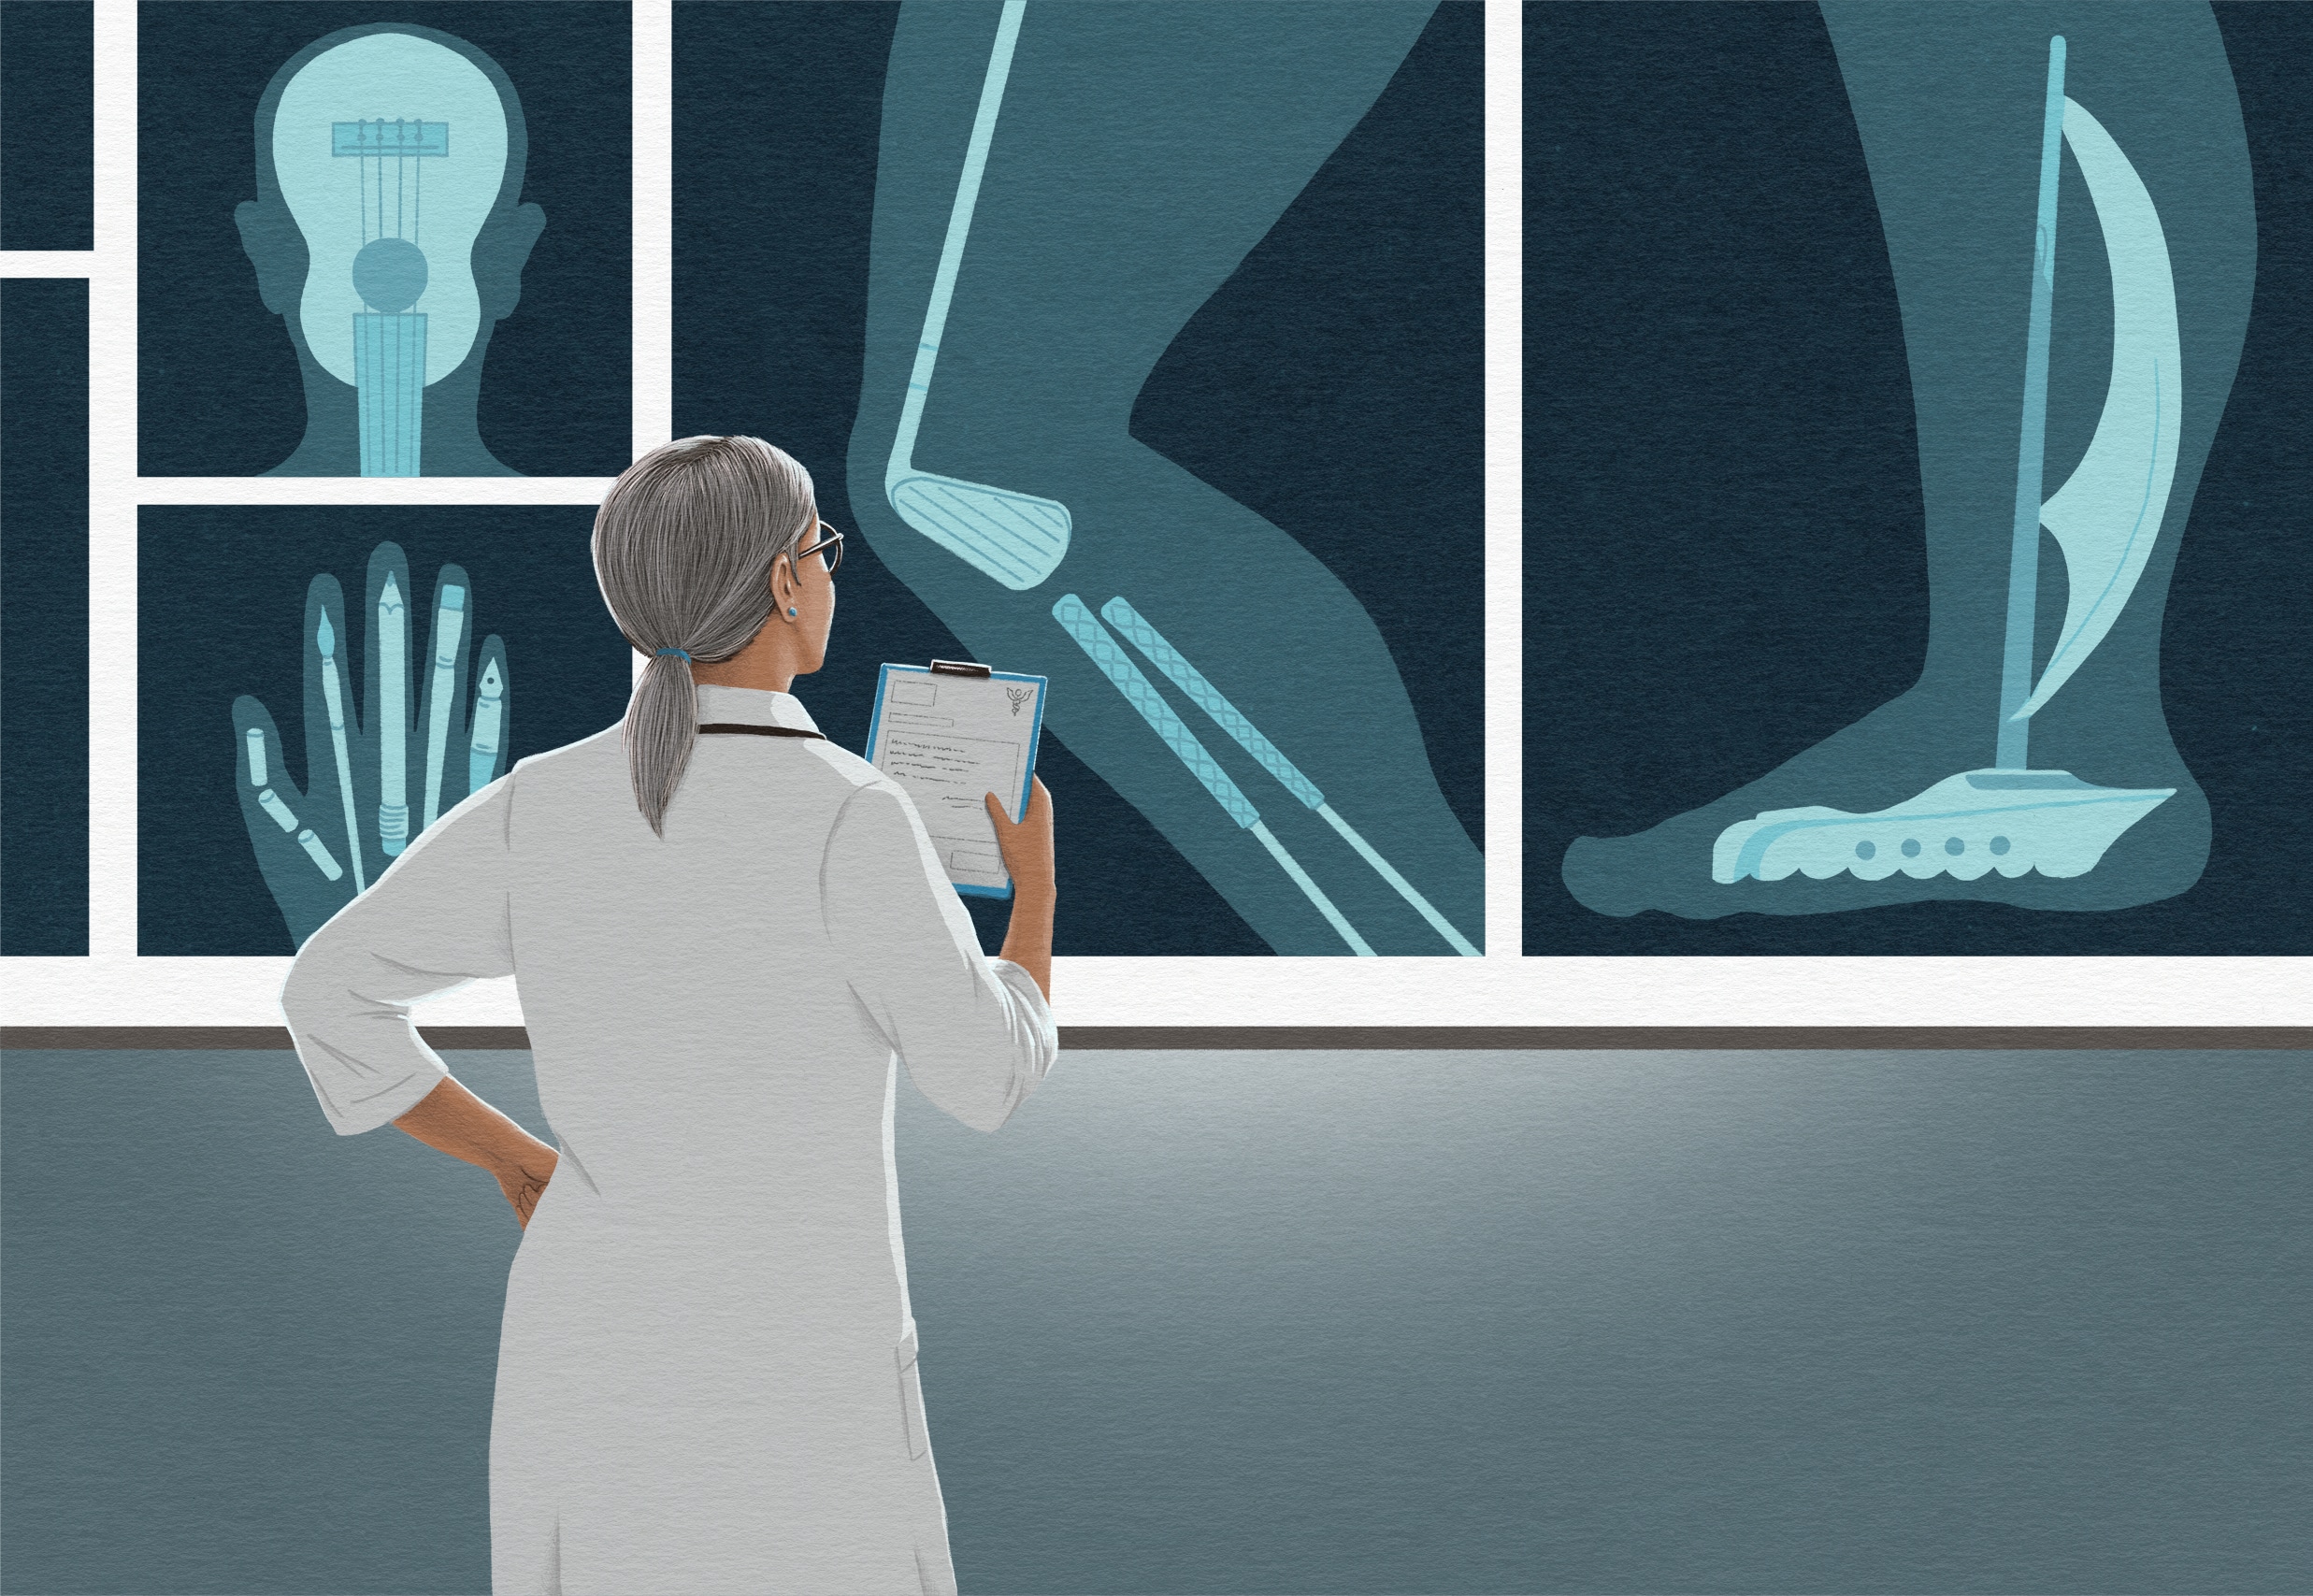 Illustration of a doctor holding a clipboard and examining x rays. But the bones in the x rays look like retirement-related activities.